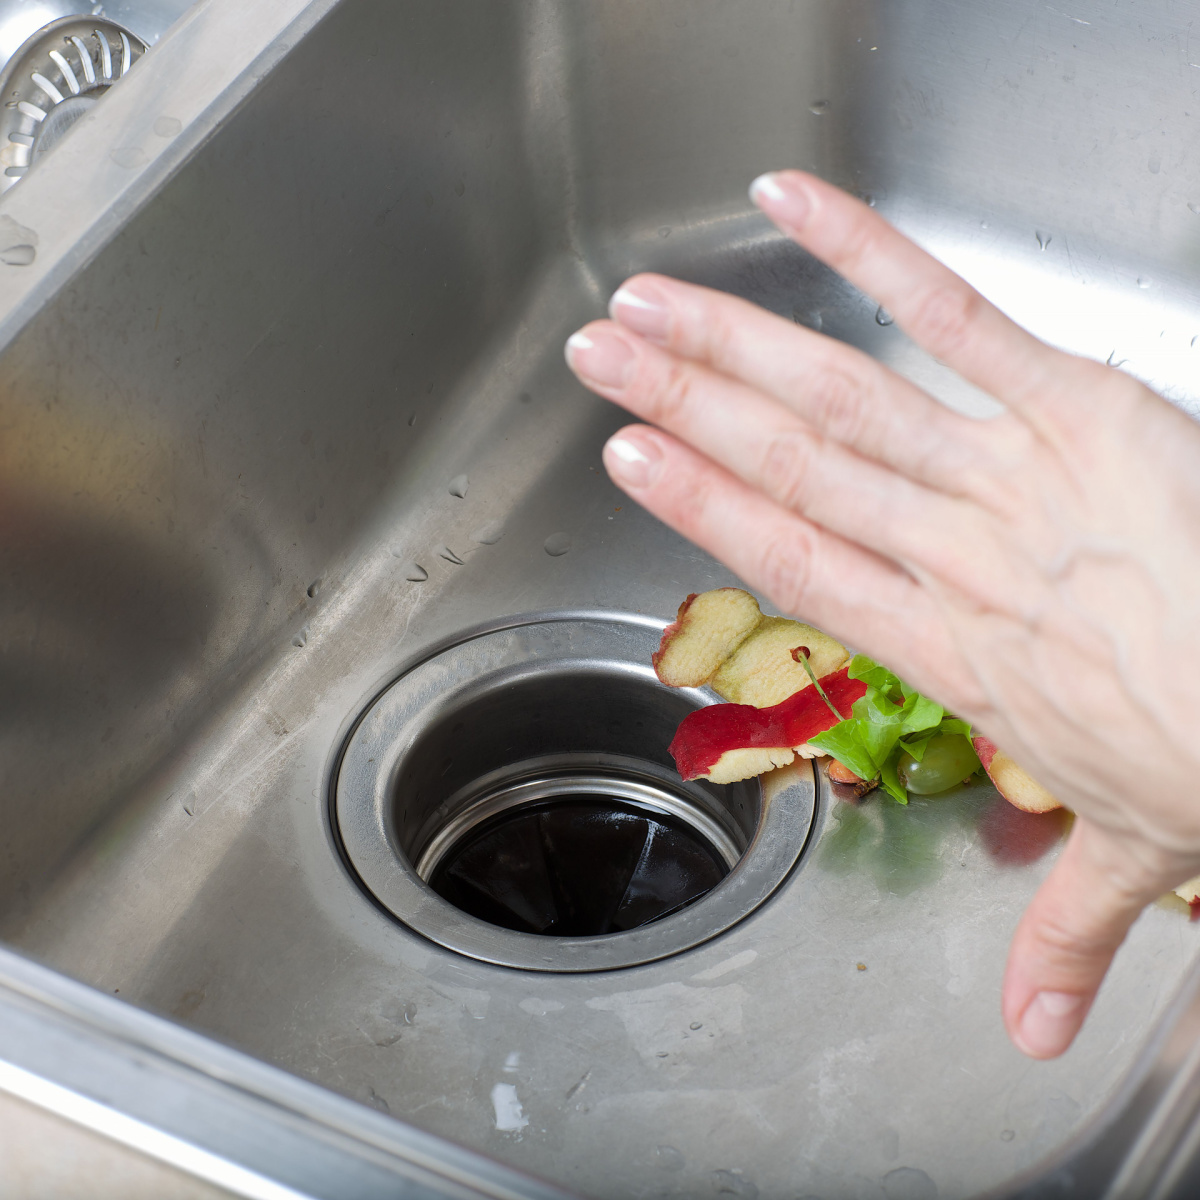 hand stopping food waste from getting into garbage disposal sink